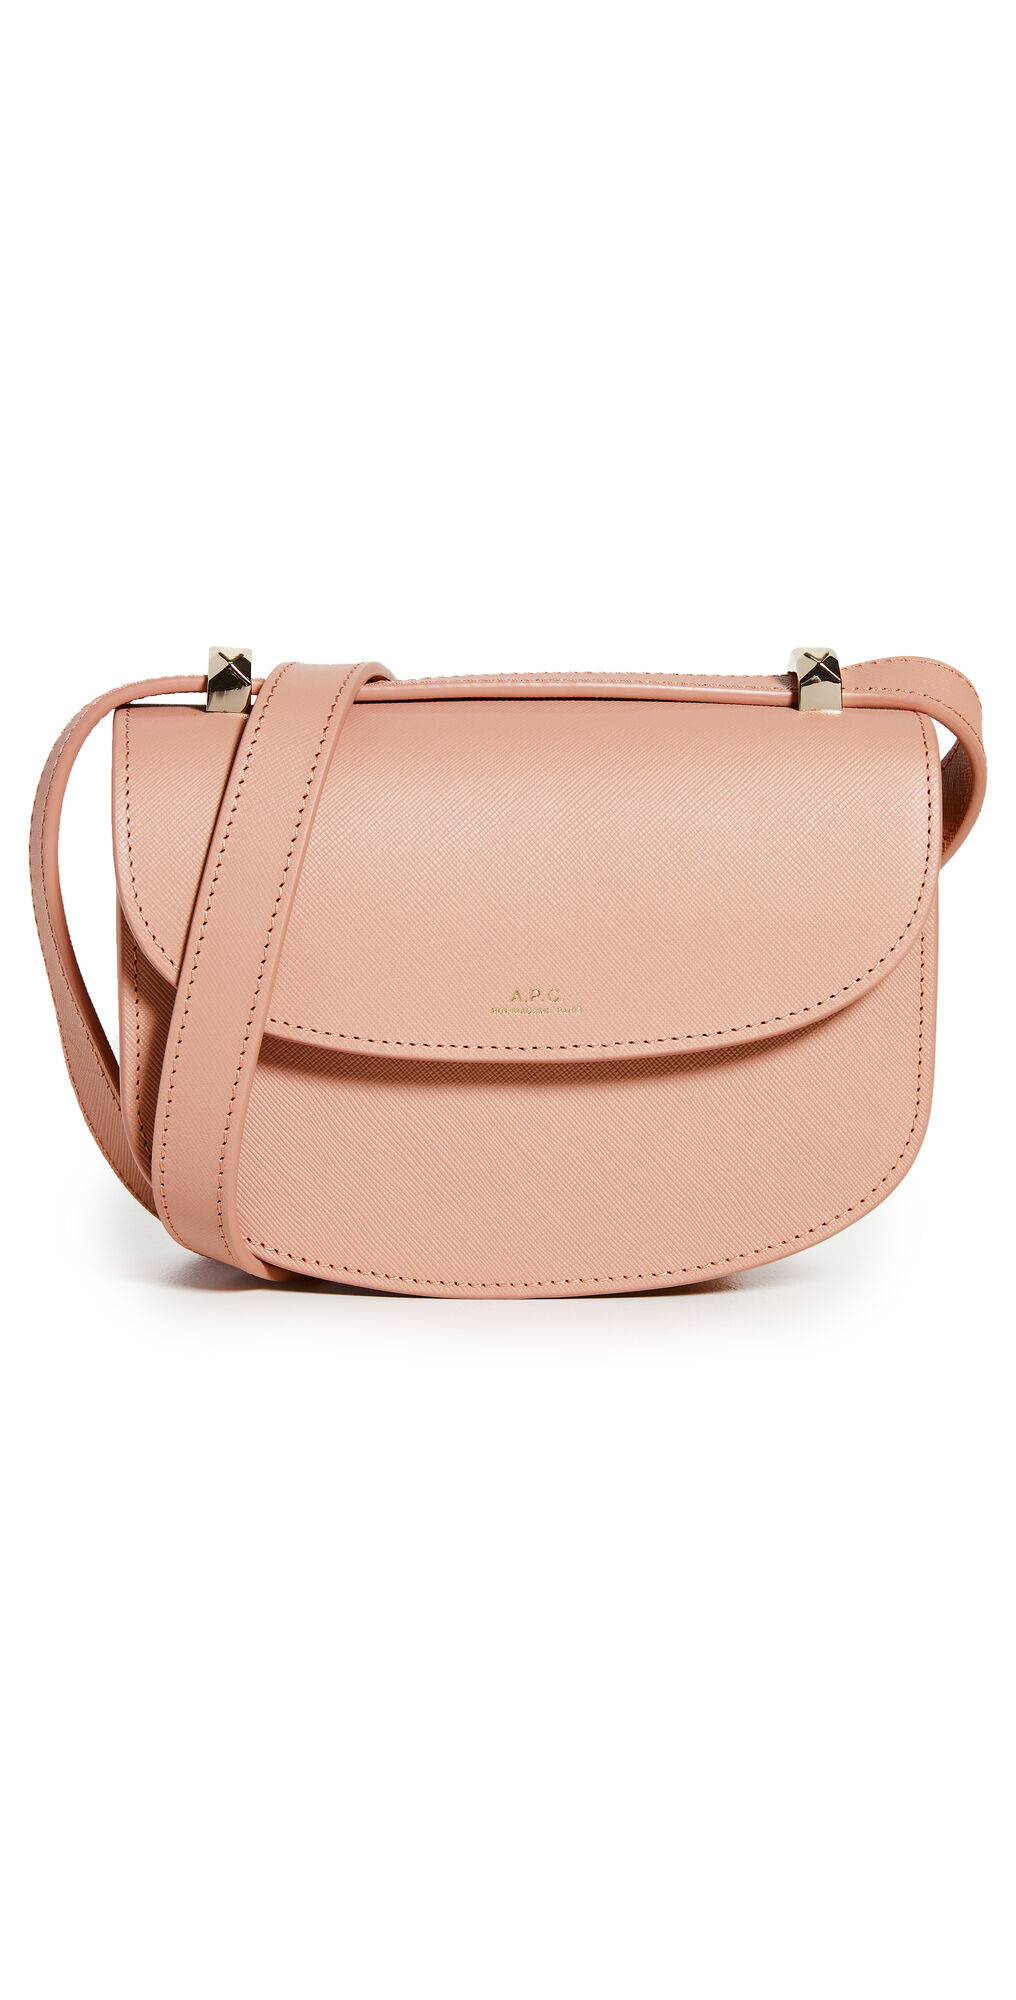 A.P.C. Sac Geneve Mini Bag Soft Pink One Size  Soft Pink  size:One Size